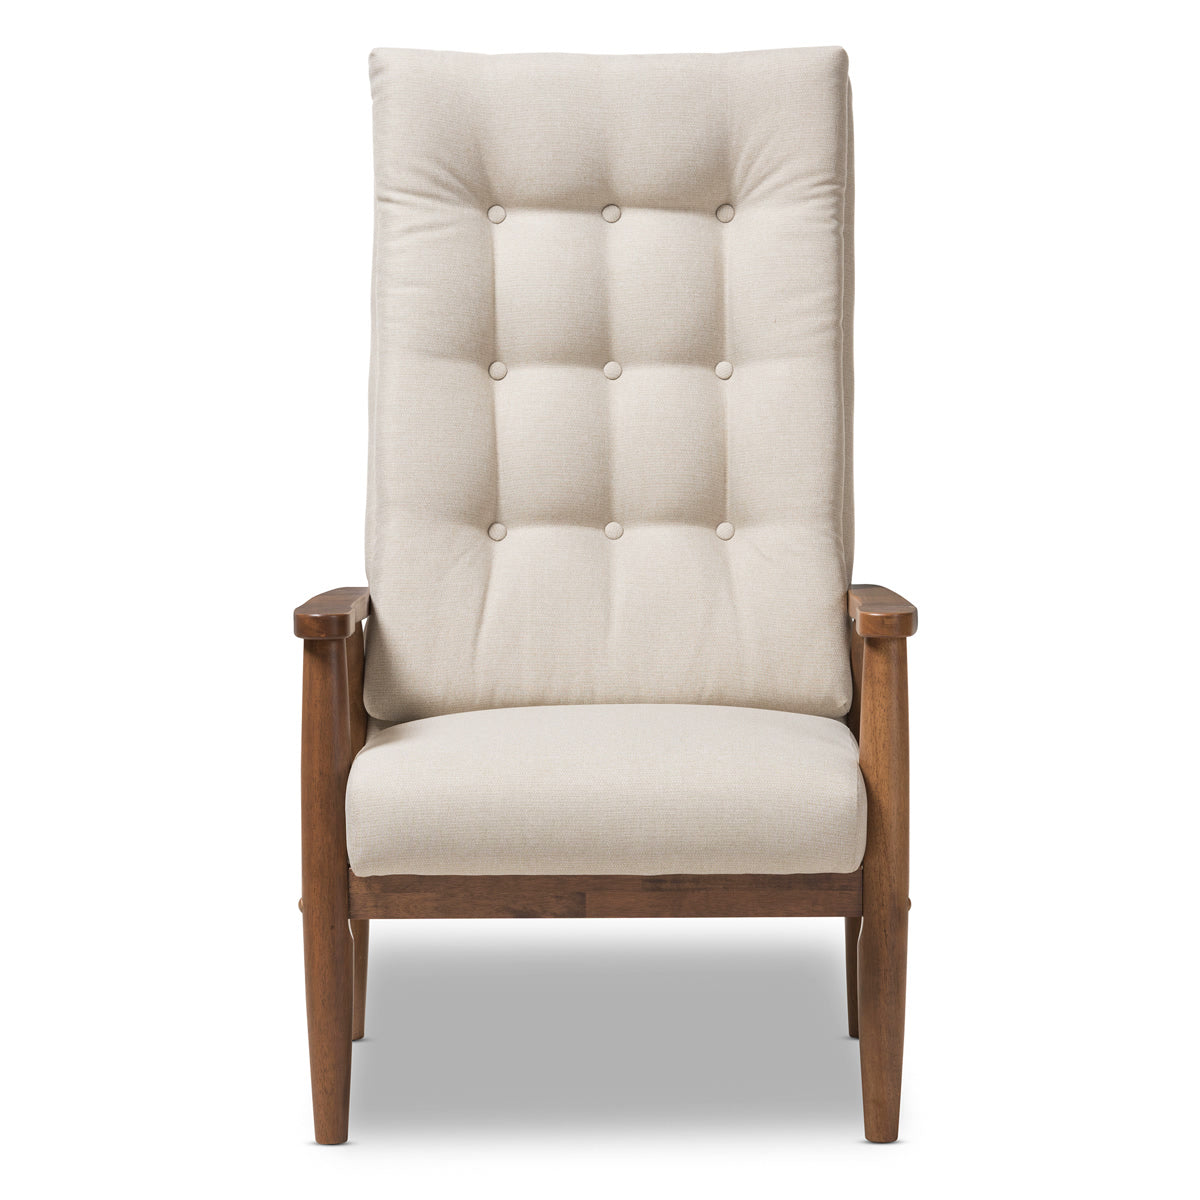 Baxton Studio Roxy Mid-Century Modern Walnut Brown Finish Wood and Light Beige Fabric Upholstered Button-Tufted High-Back Chair Baxton Studio-chairs-Minimal And Modern - 3